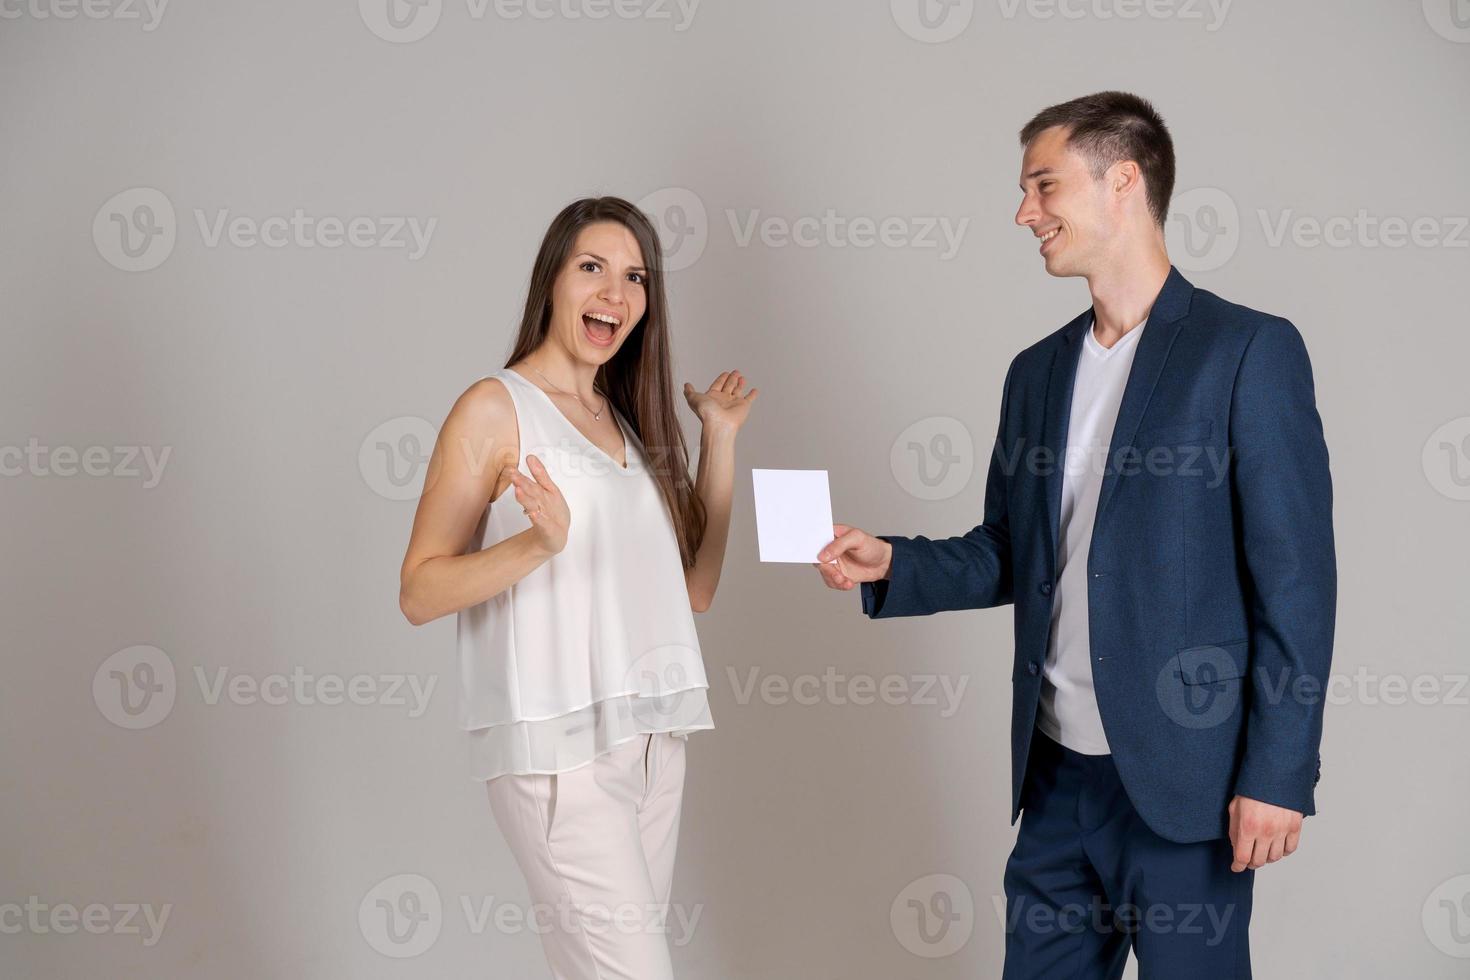 Business partners are happy to receive an important document. Man in blue suit photo